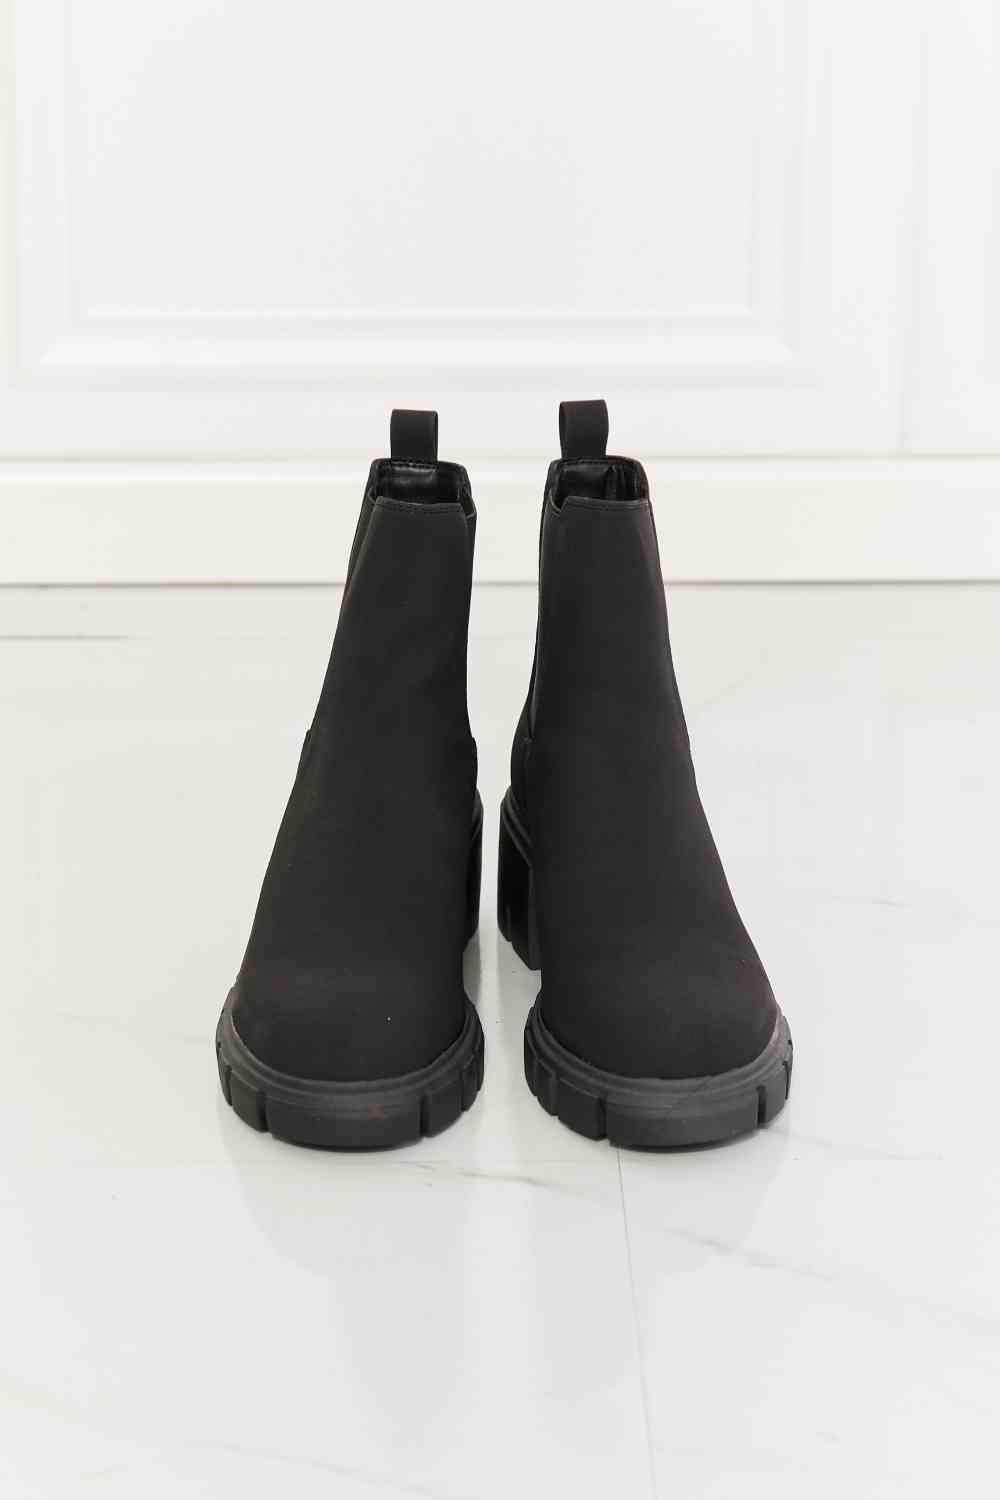 MMShoes Work For It Matte Lug Sole Chelsea Boots in Black - Boots